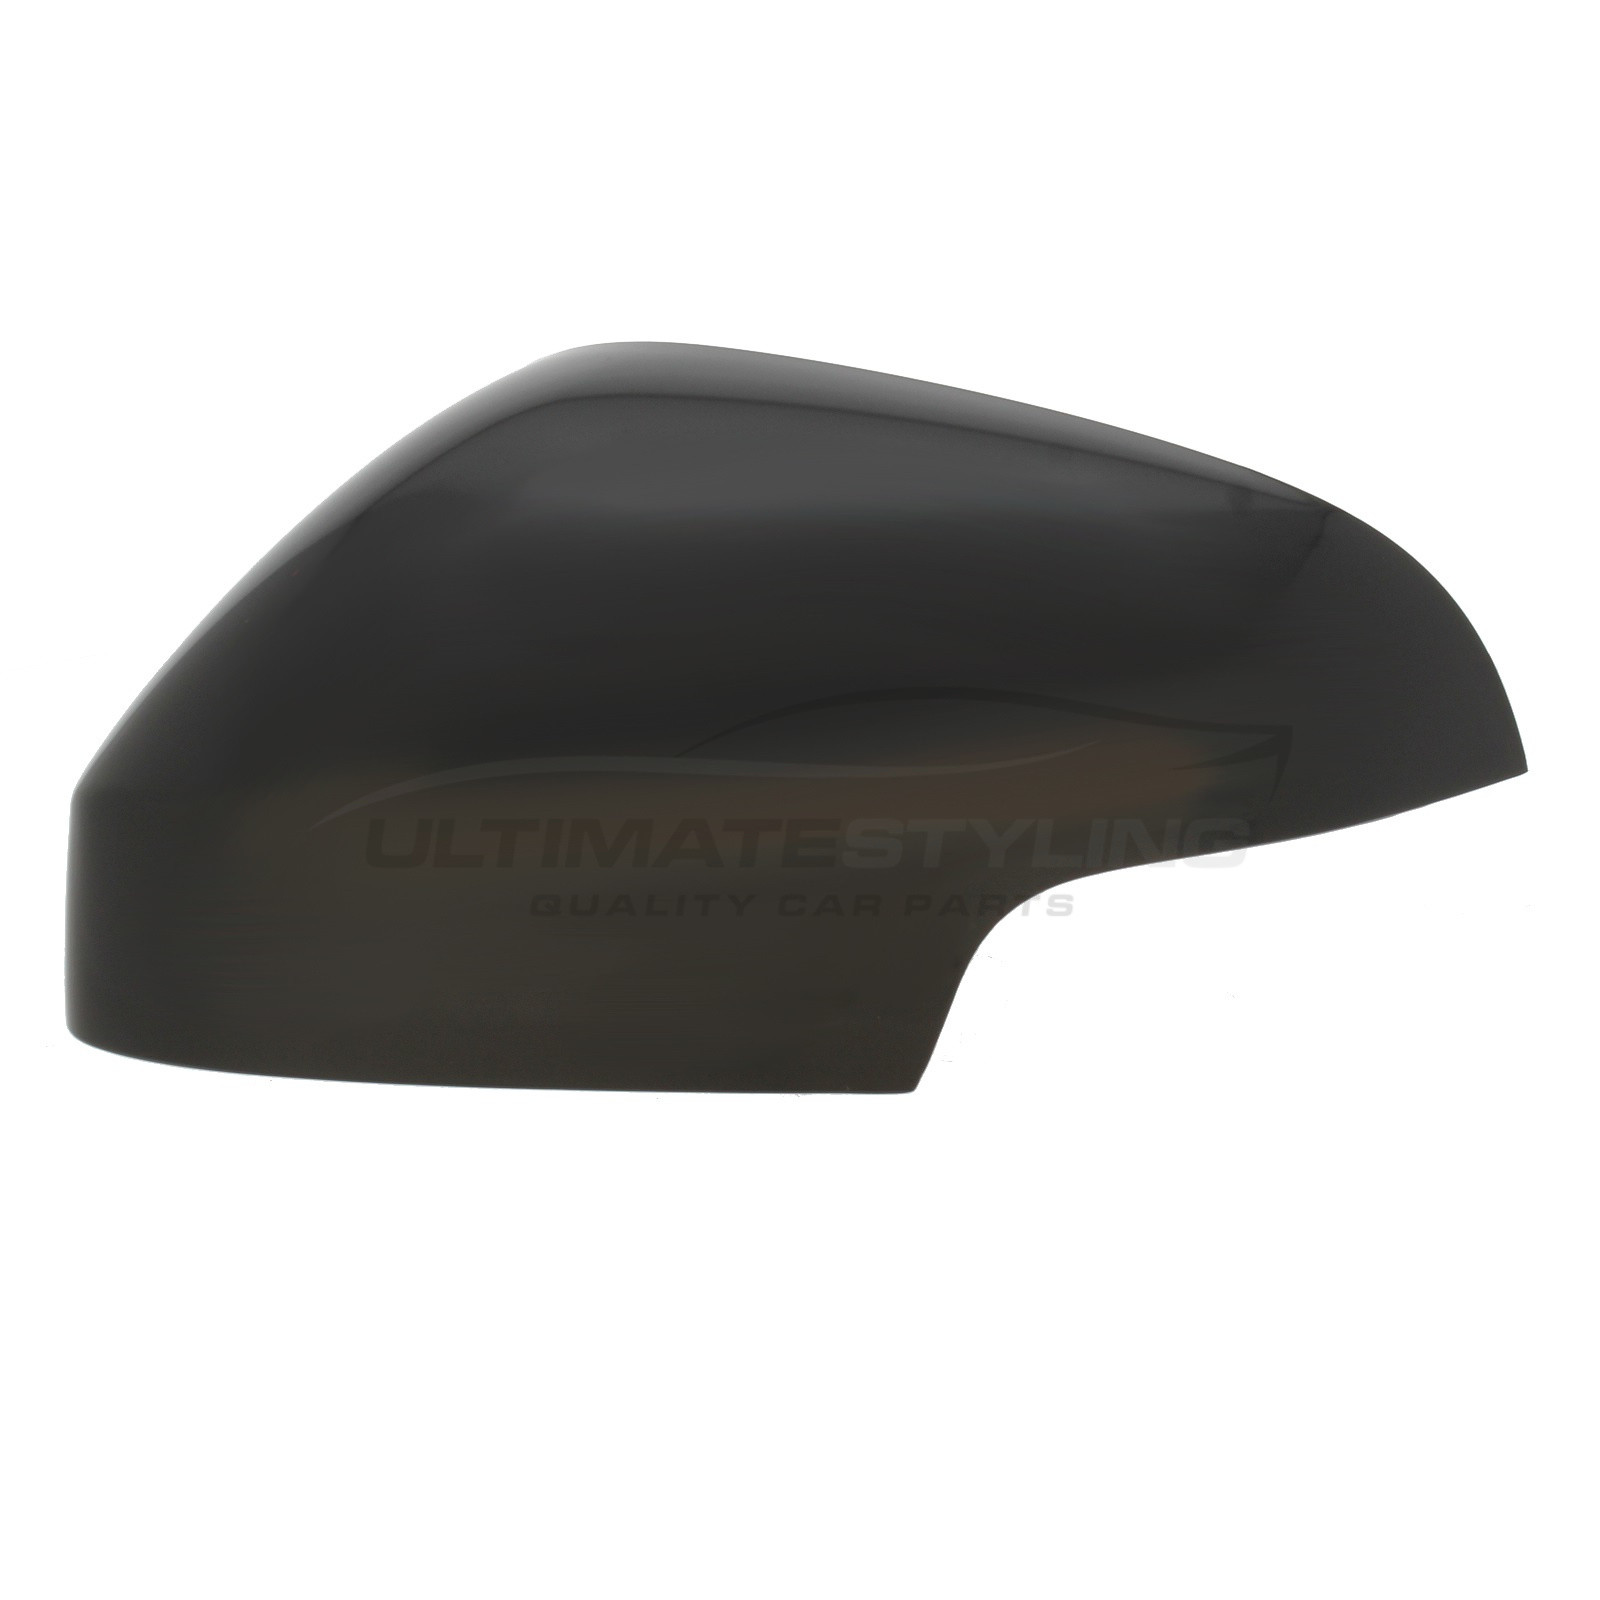 Volvo C30 2006-2014, Volvo C70 2006-2014, Volvo S40 2004-2013, Volvo V50 2004-2013 Wing Mirror Cover Cap Casing Black, Suitable for Painting Passenger Side (LH)